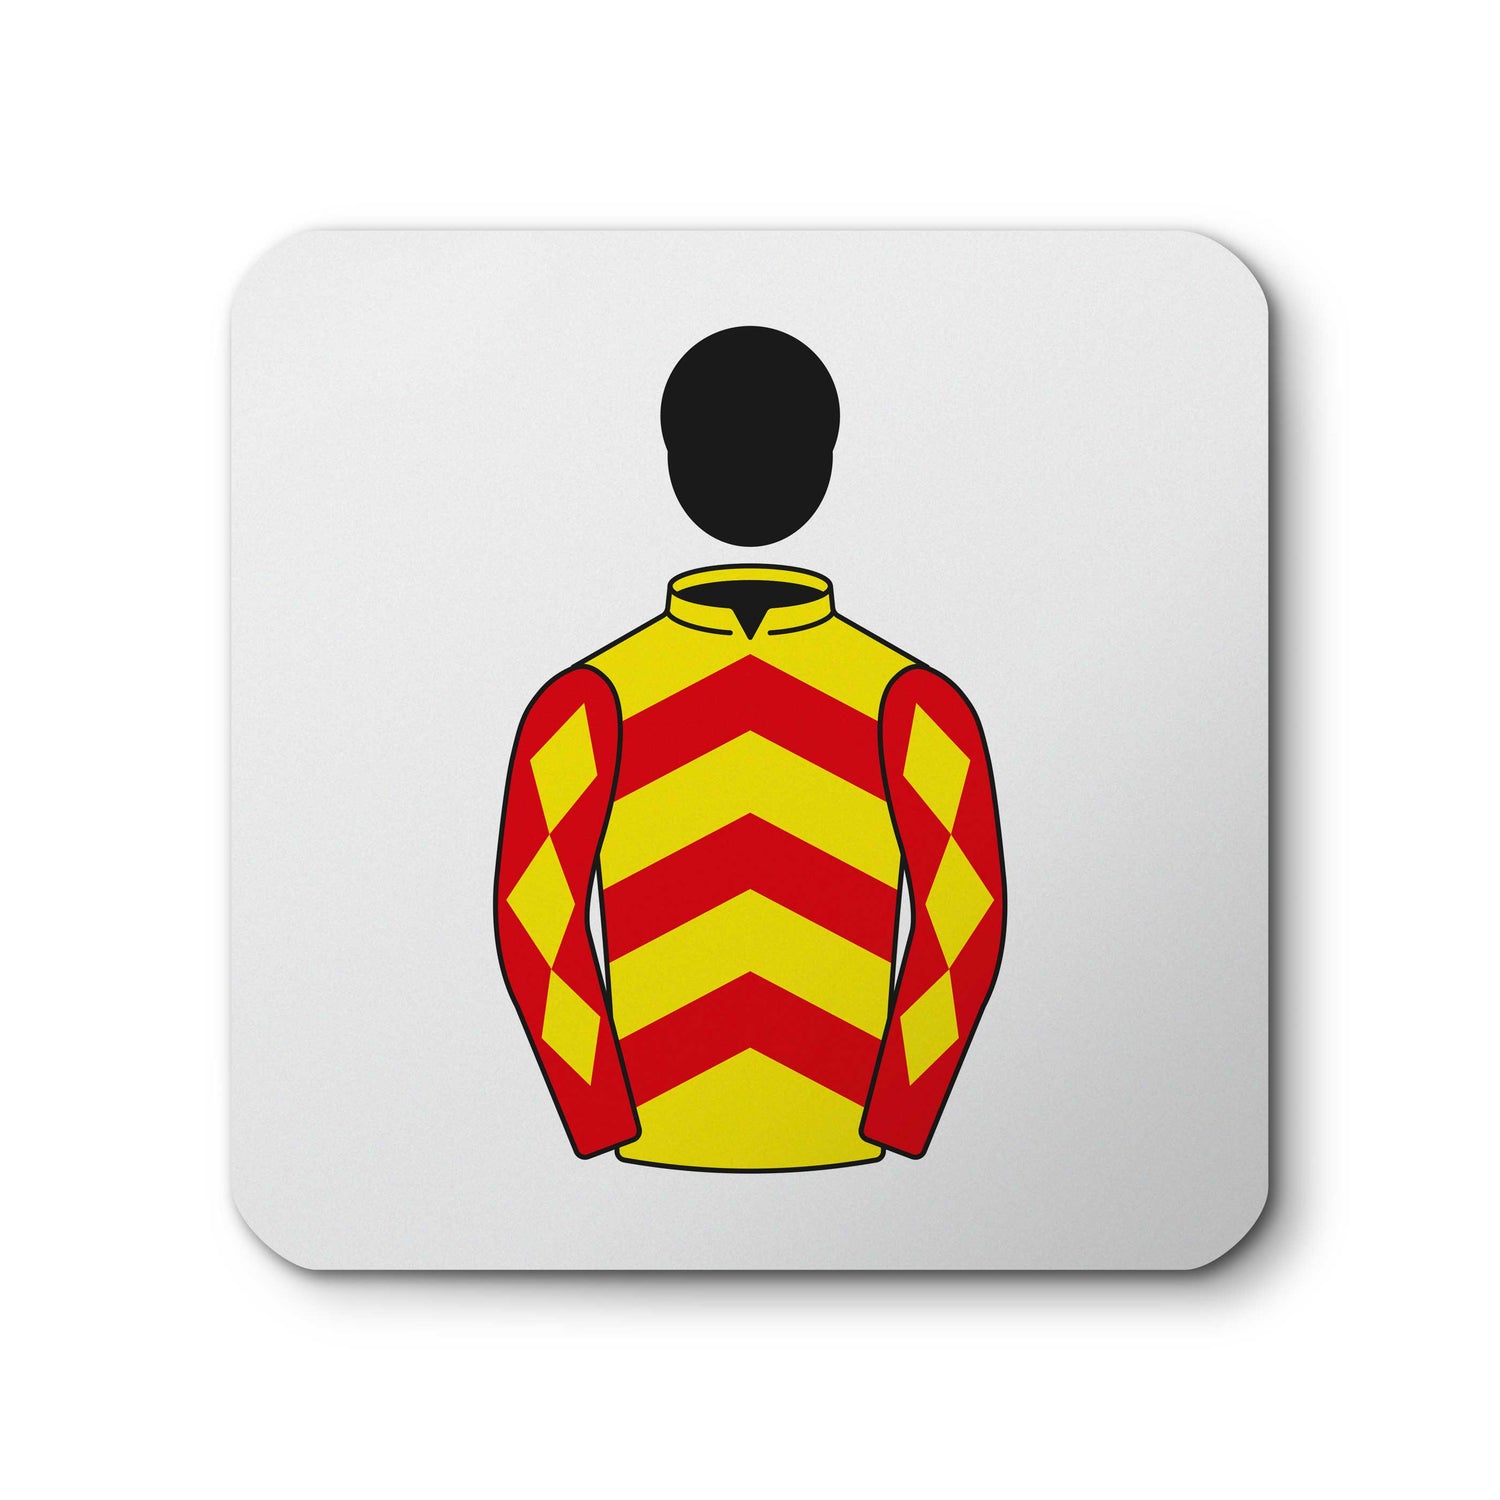 Paul Dean Horse Racing Coaster - Hacked Up Horse Racing Gifts